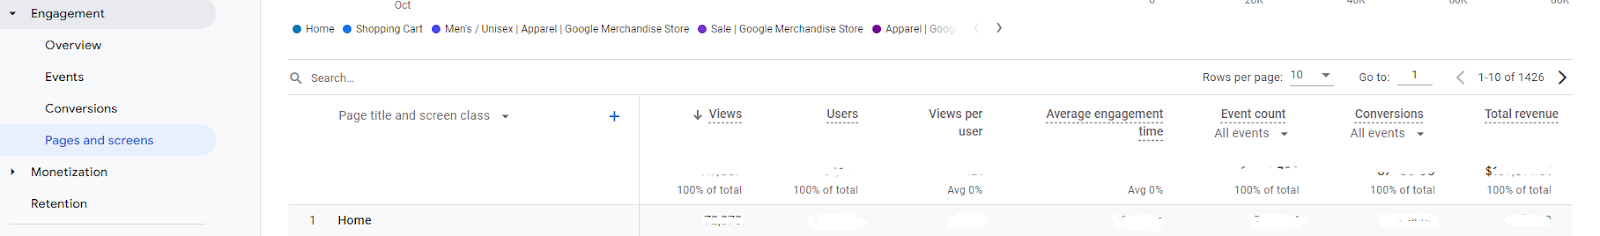 Google Analytics Pages and Screens report